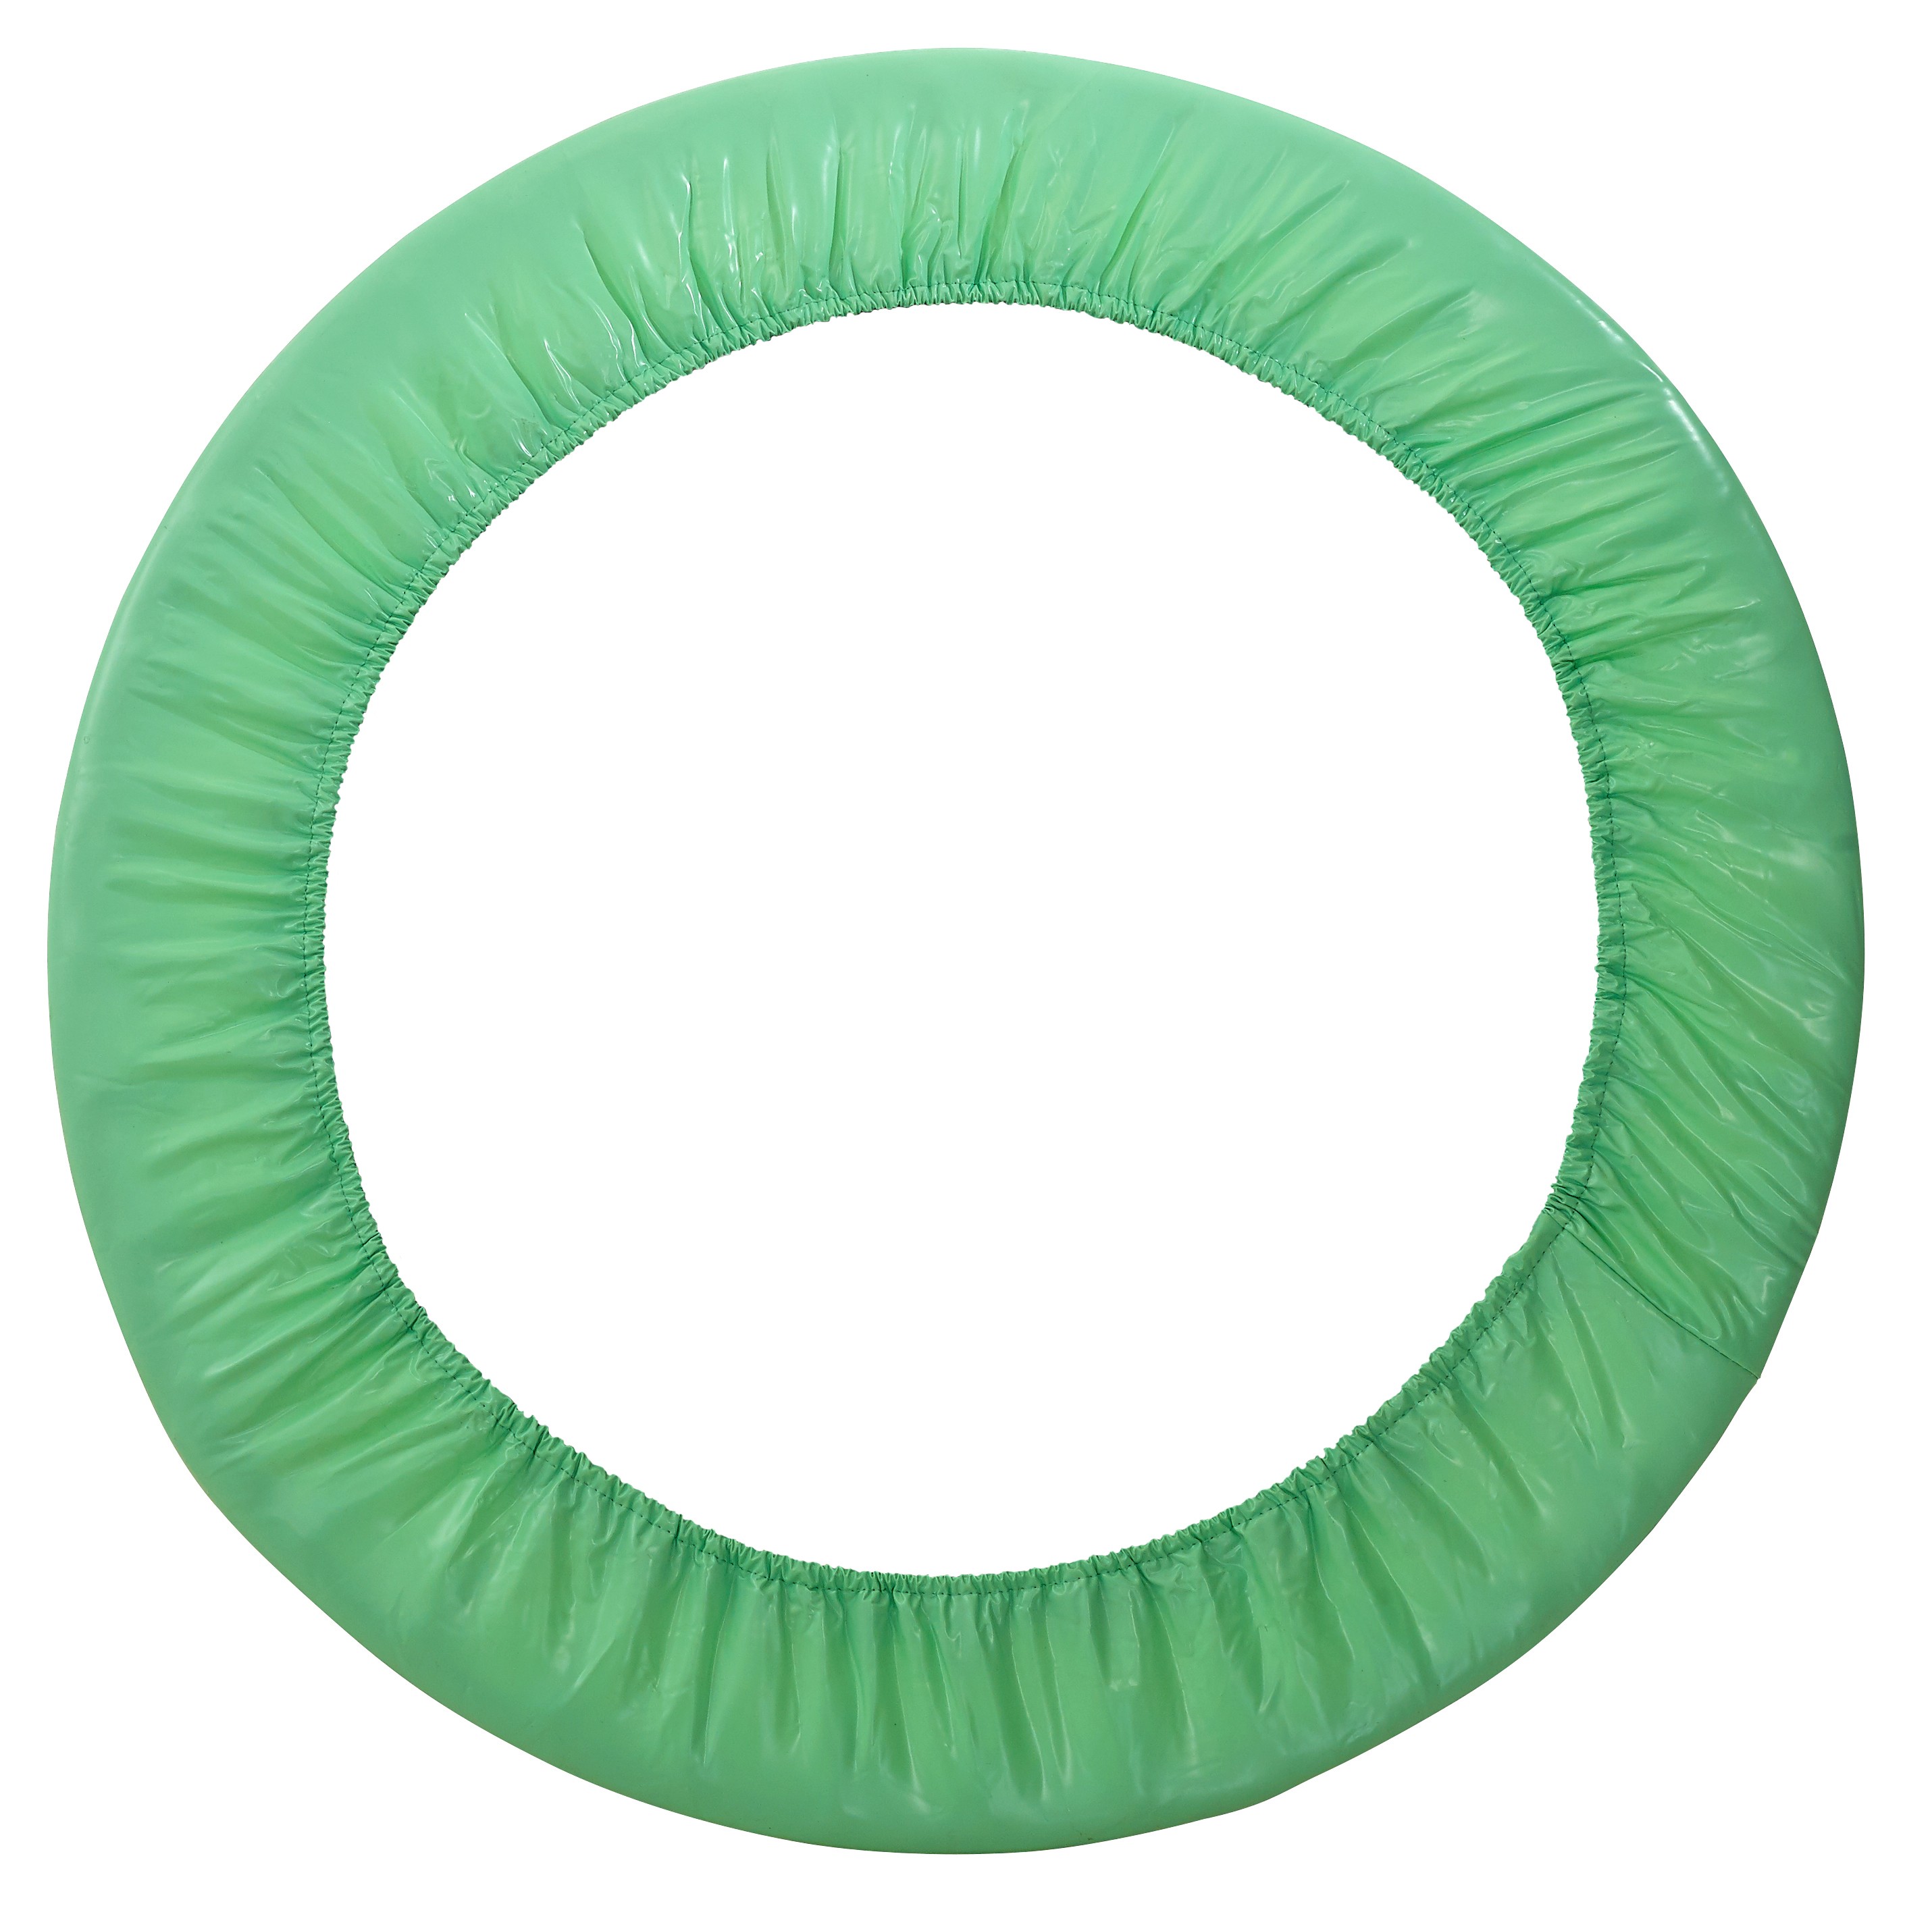 40" Mini Round Trampoline Replacement Safety Pad (Spring Cover) for 6 Legs - Green